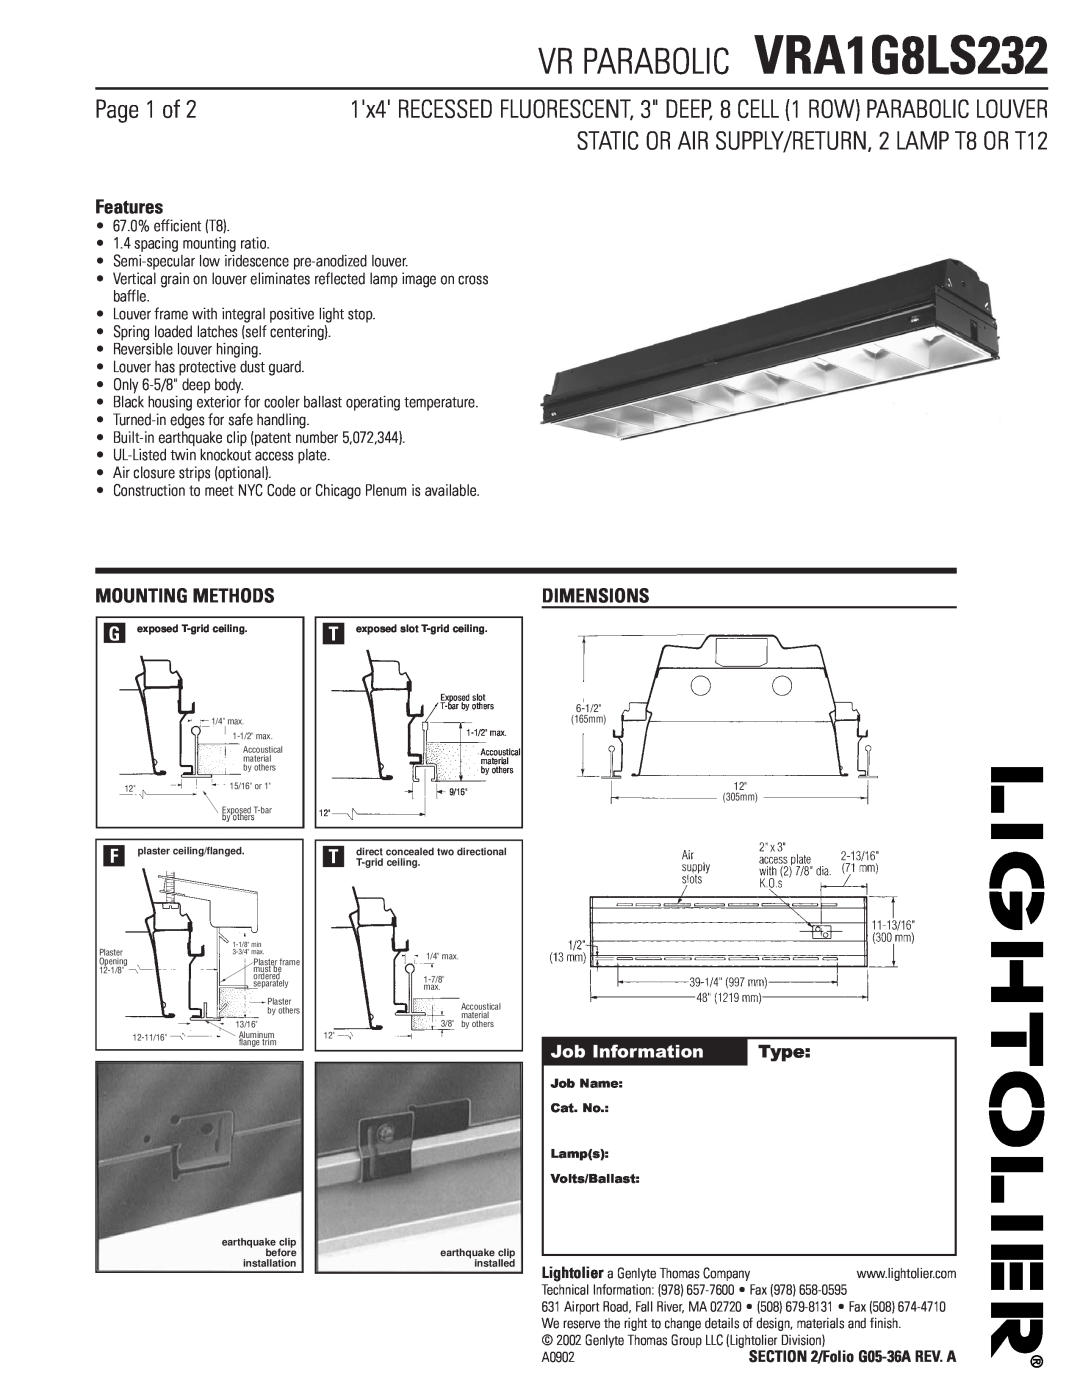 Lightolier dimensions VR PARABOLIC VRA1G8LS232, Page 1 of, STATIC OR AIR SUPPLY/RETURN, 2 LAMP T8 OR T12, Features 